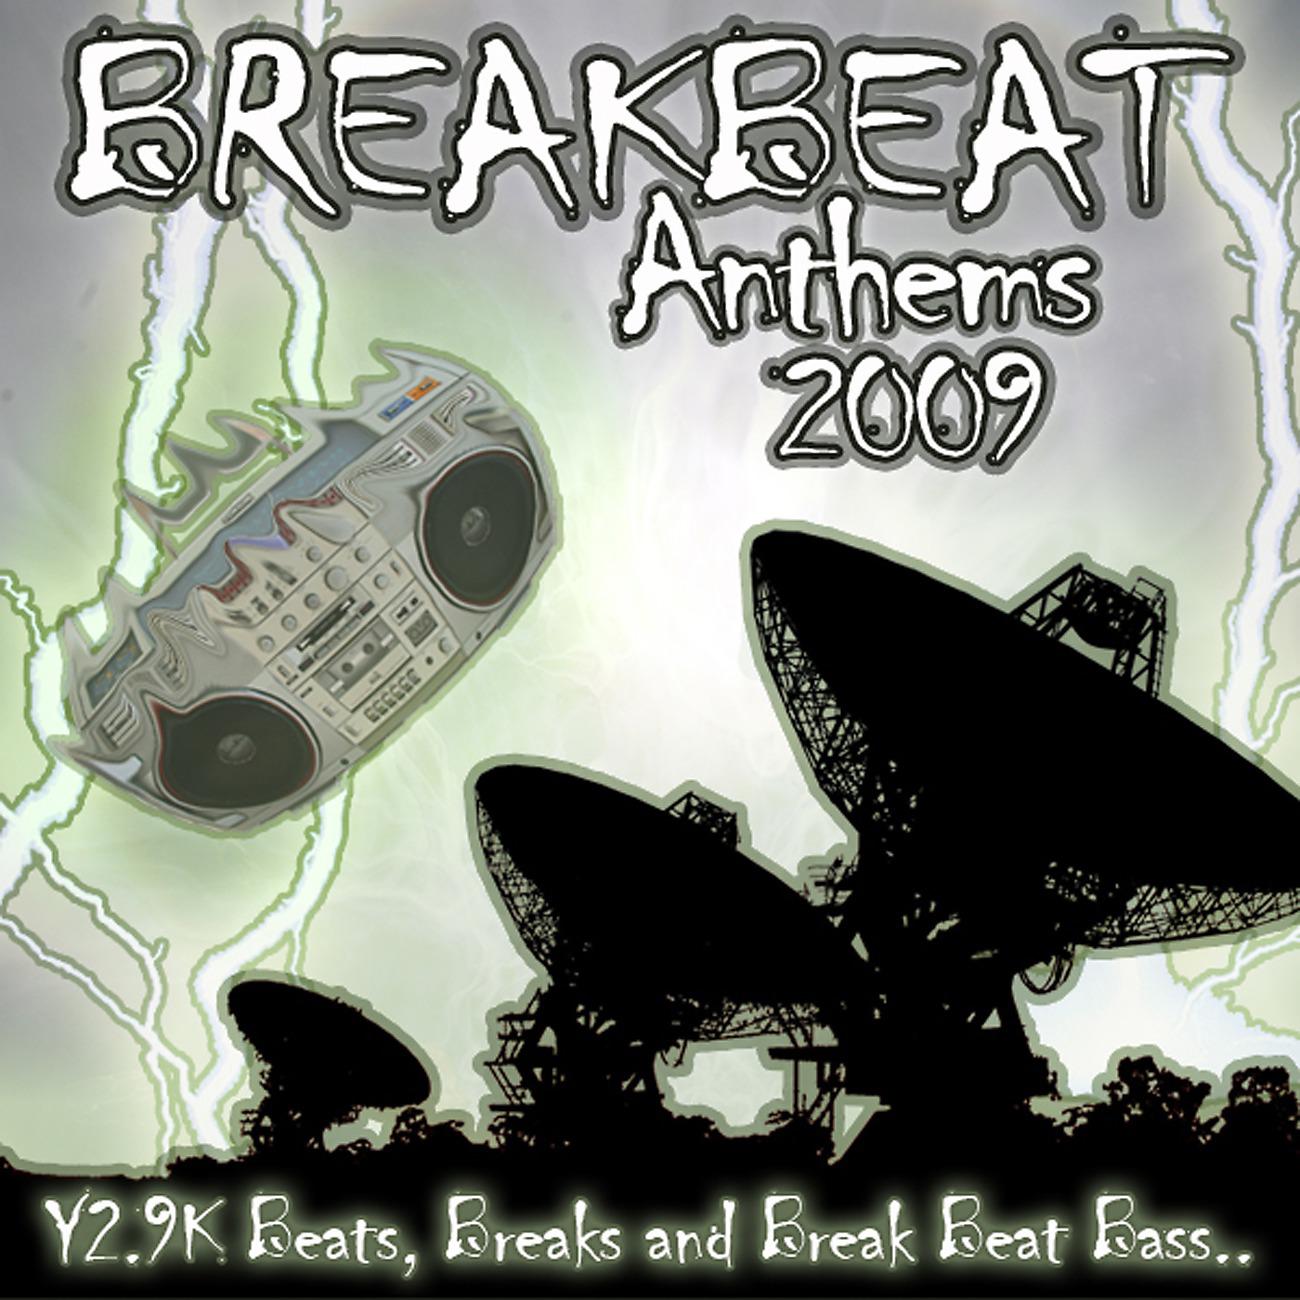 Постер альбома Breakbeat Anthems 2009 - The Science of Breaks and Break Beat Bass for Underground Clubland.